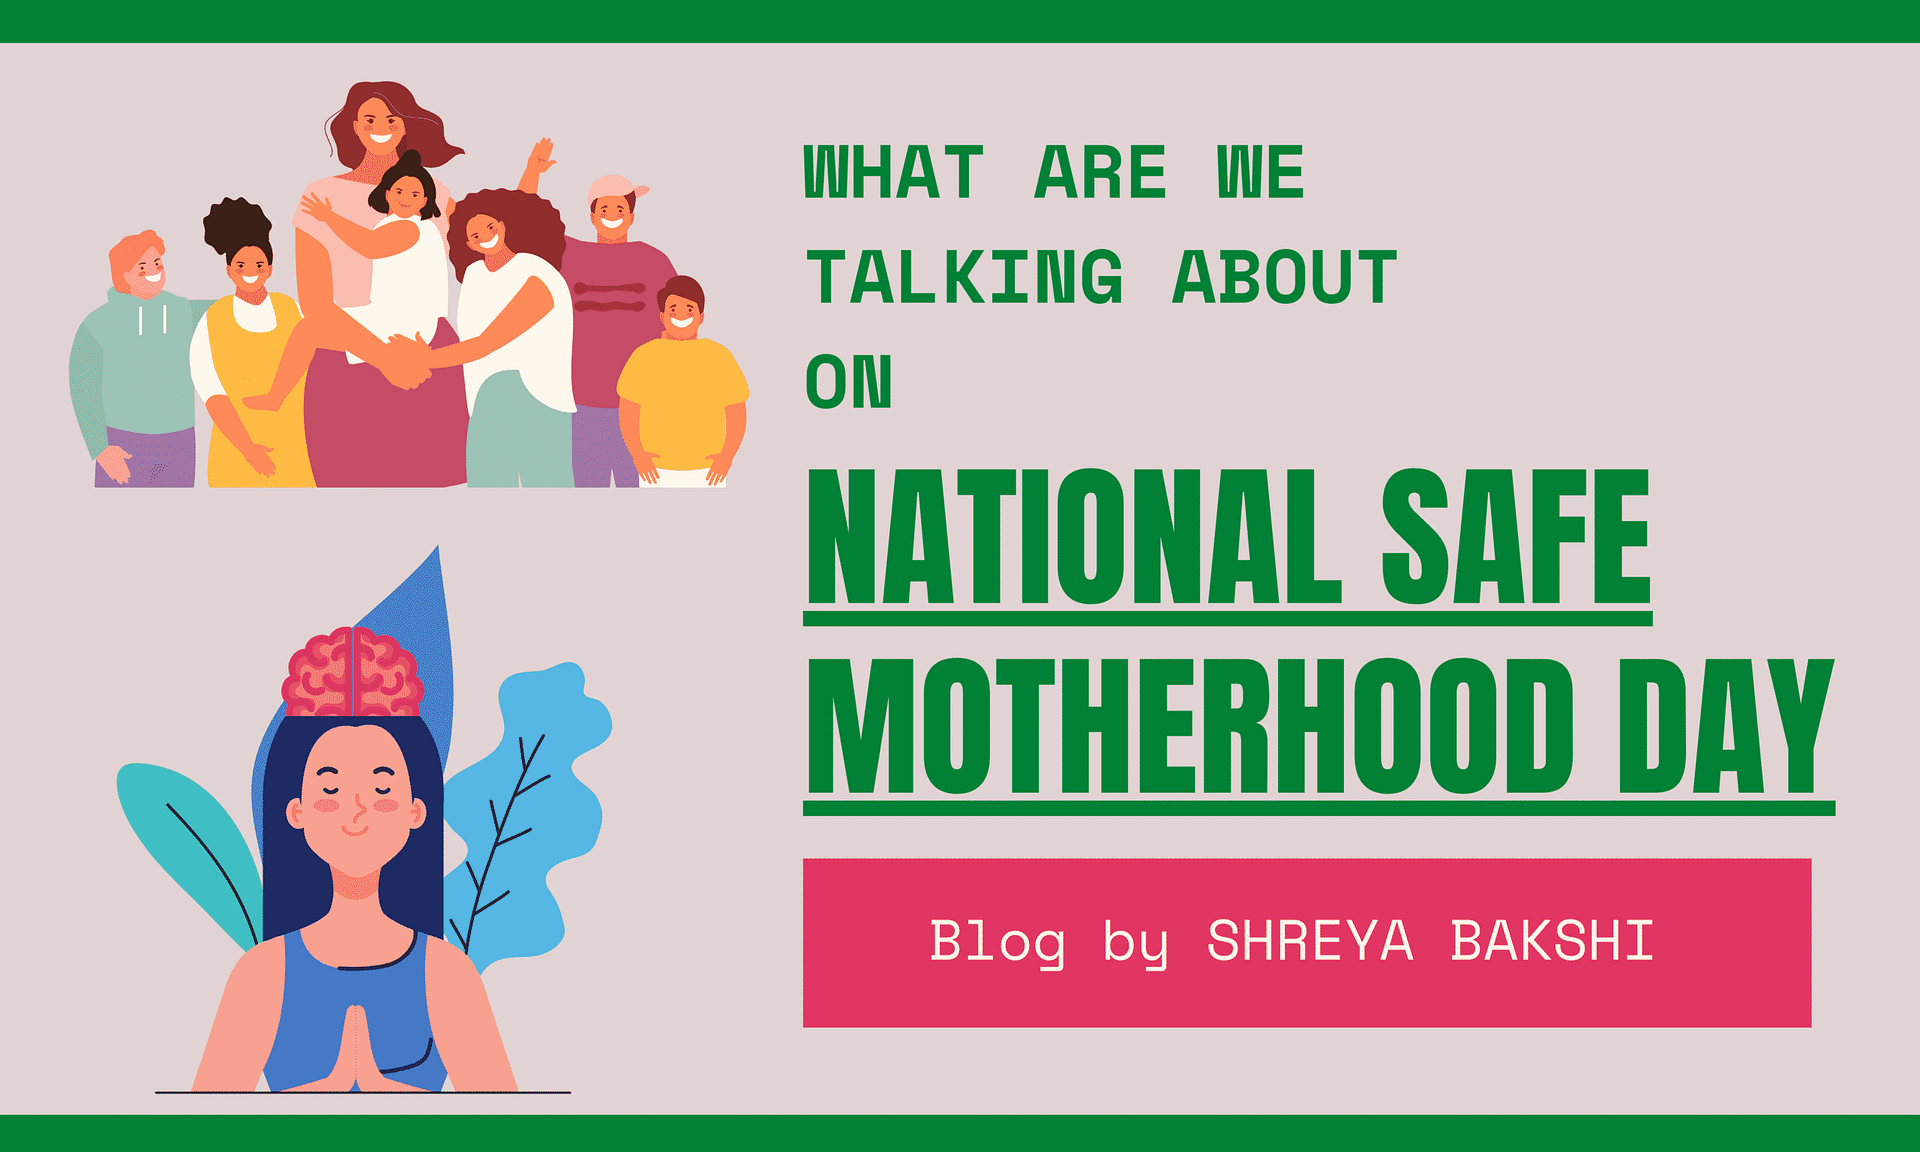 What are we talking about this NATIONAL SAFE MOTHERHOOD DAY 2021?